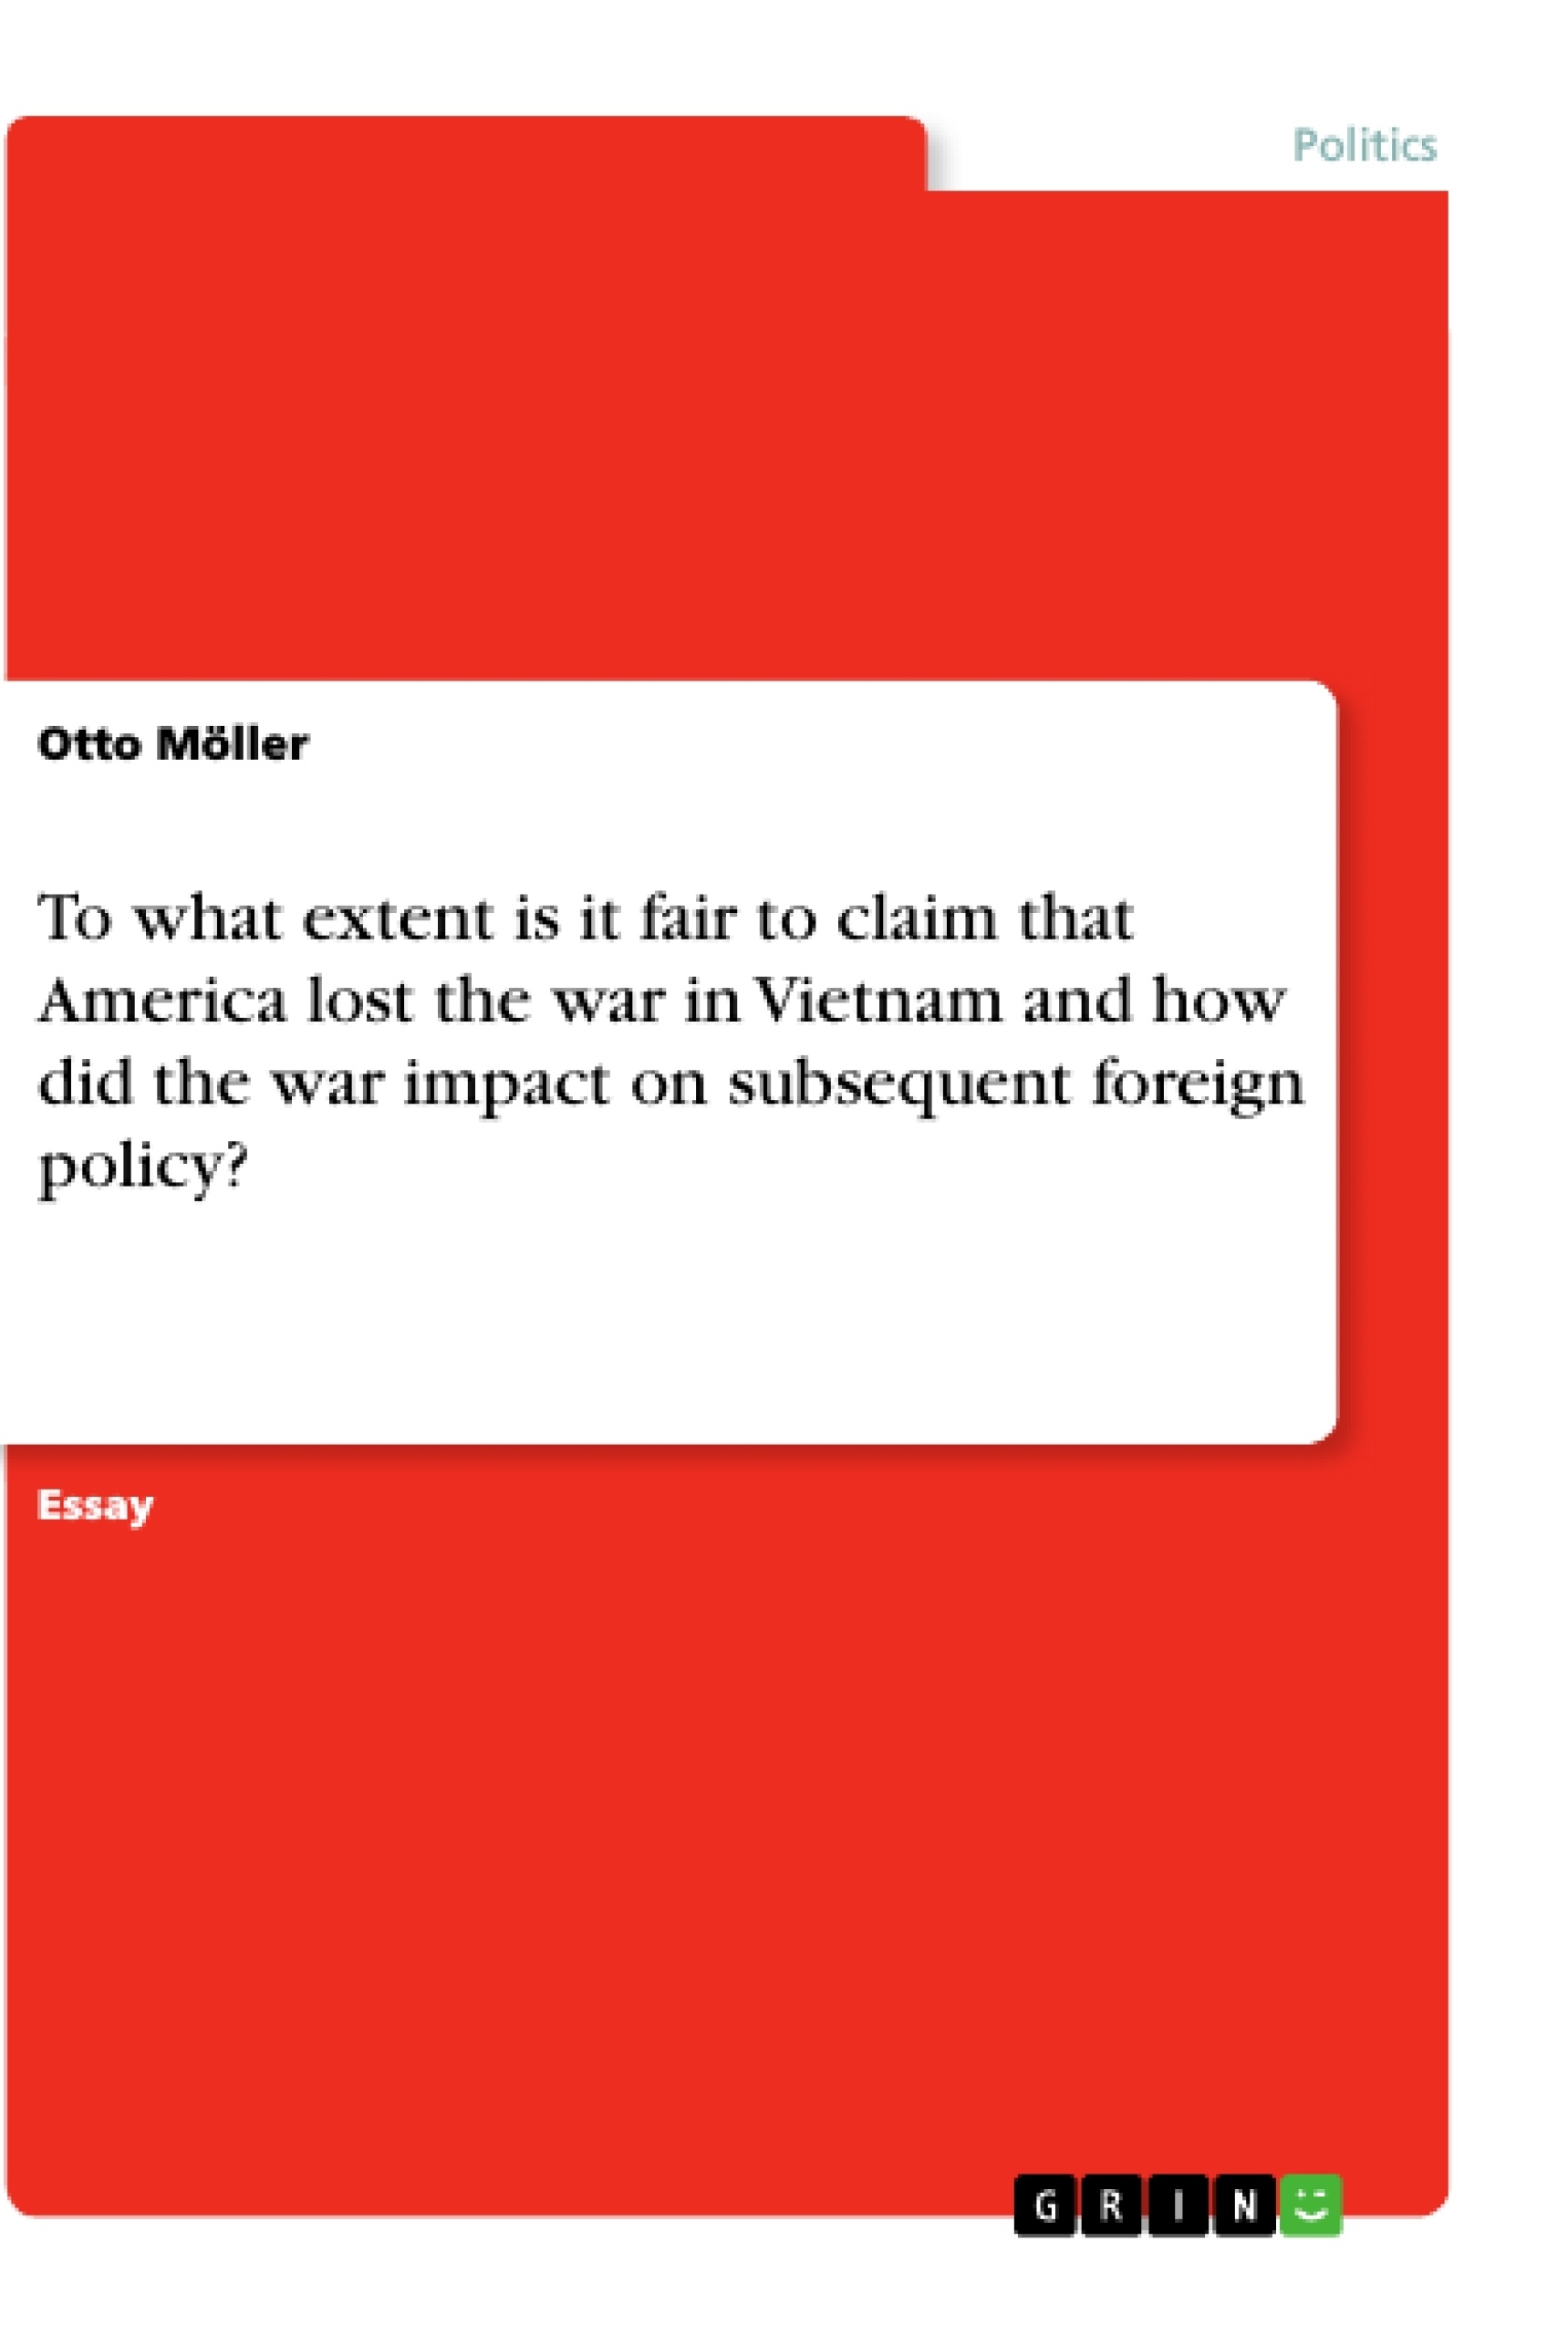 Titre: To what extent is it fair to claim that America lost the war in Vietnam and how did the war impact on subsequent foreign policy?